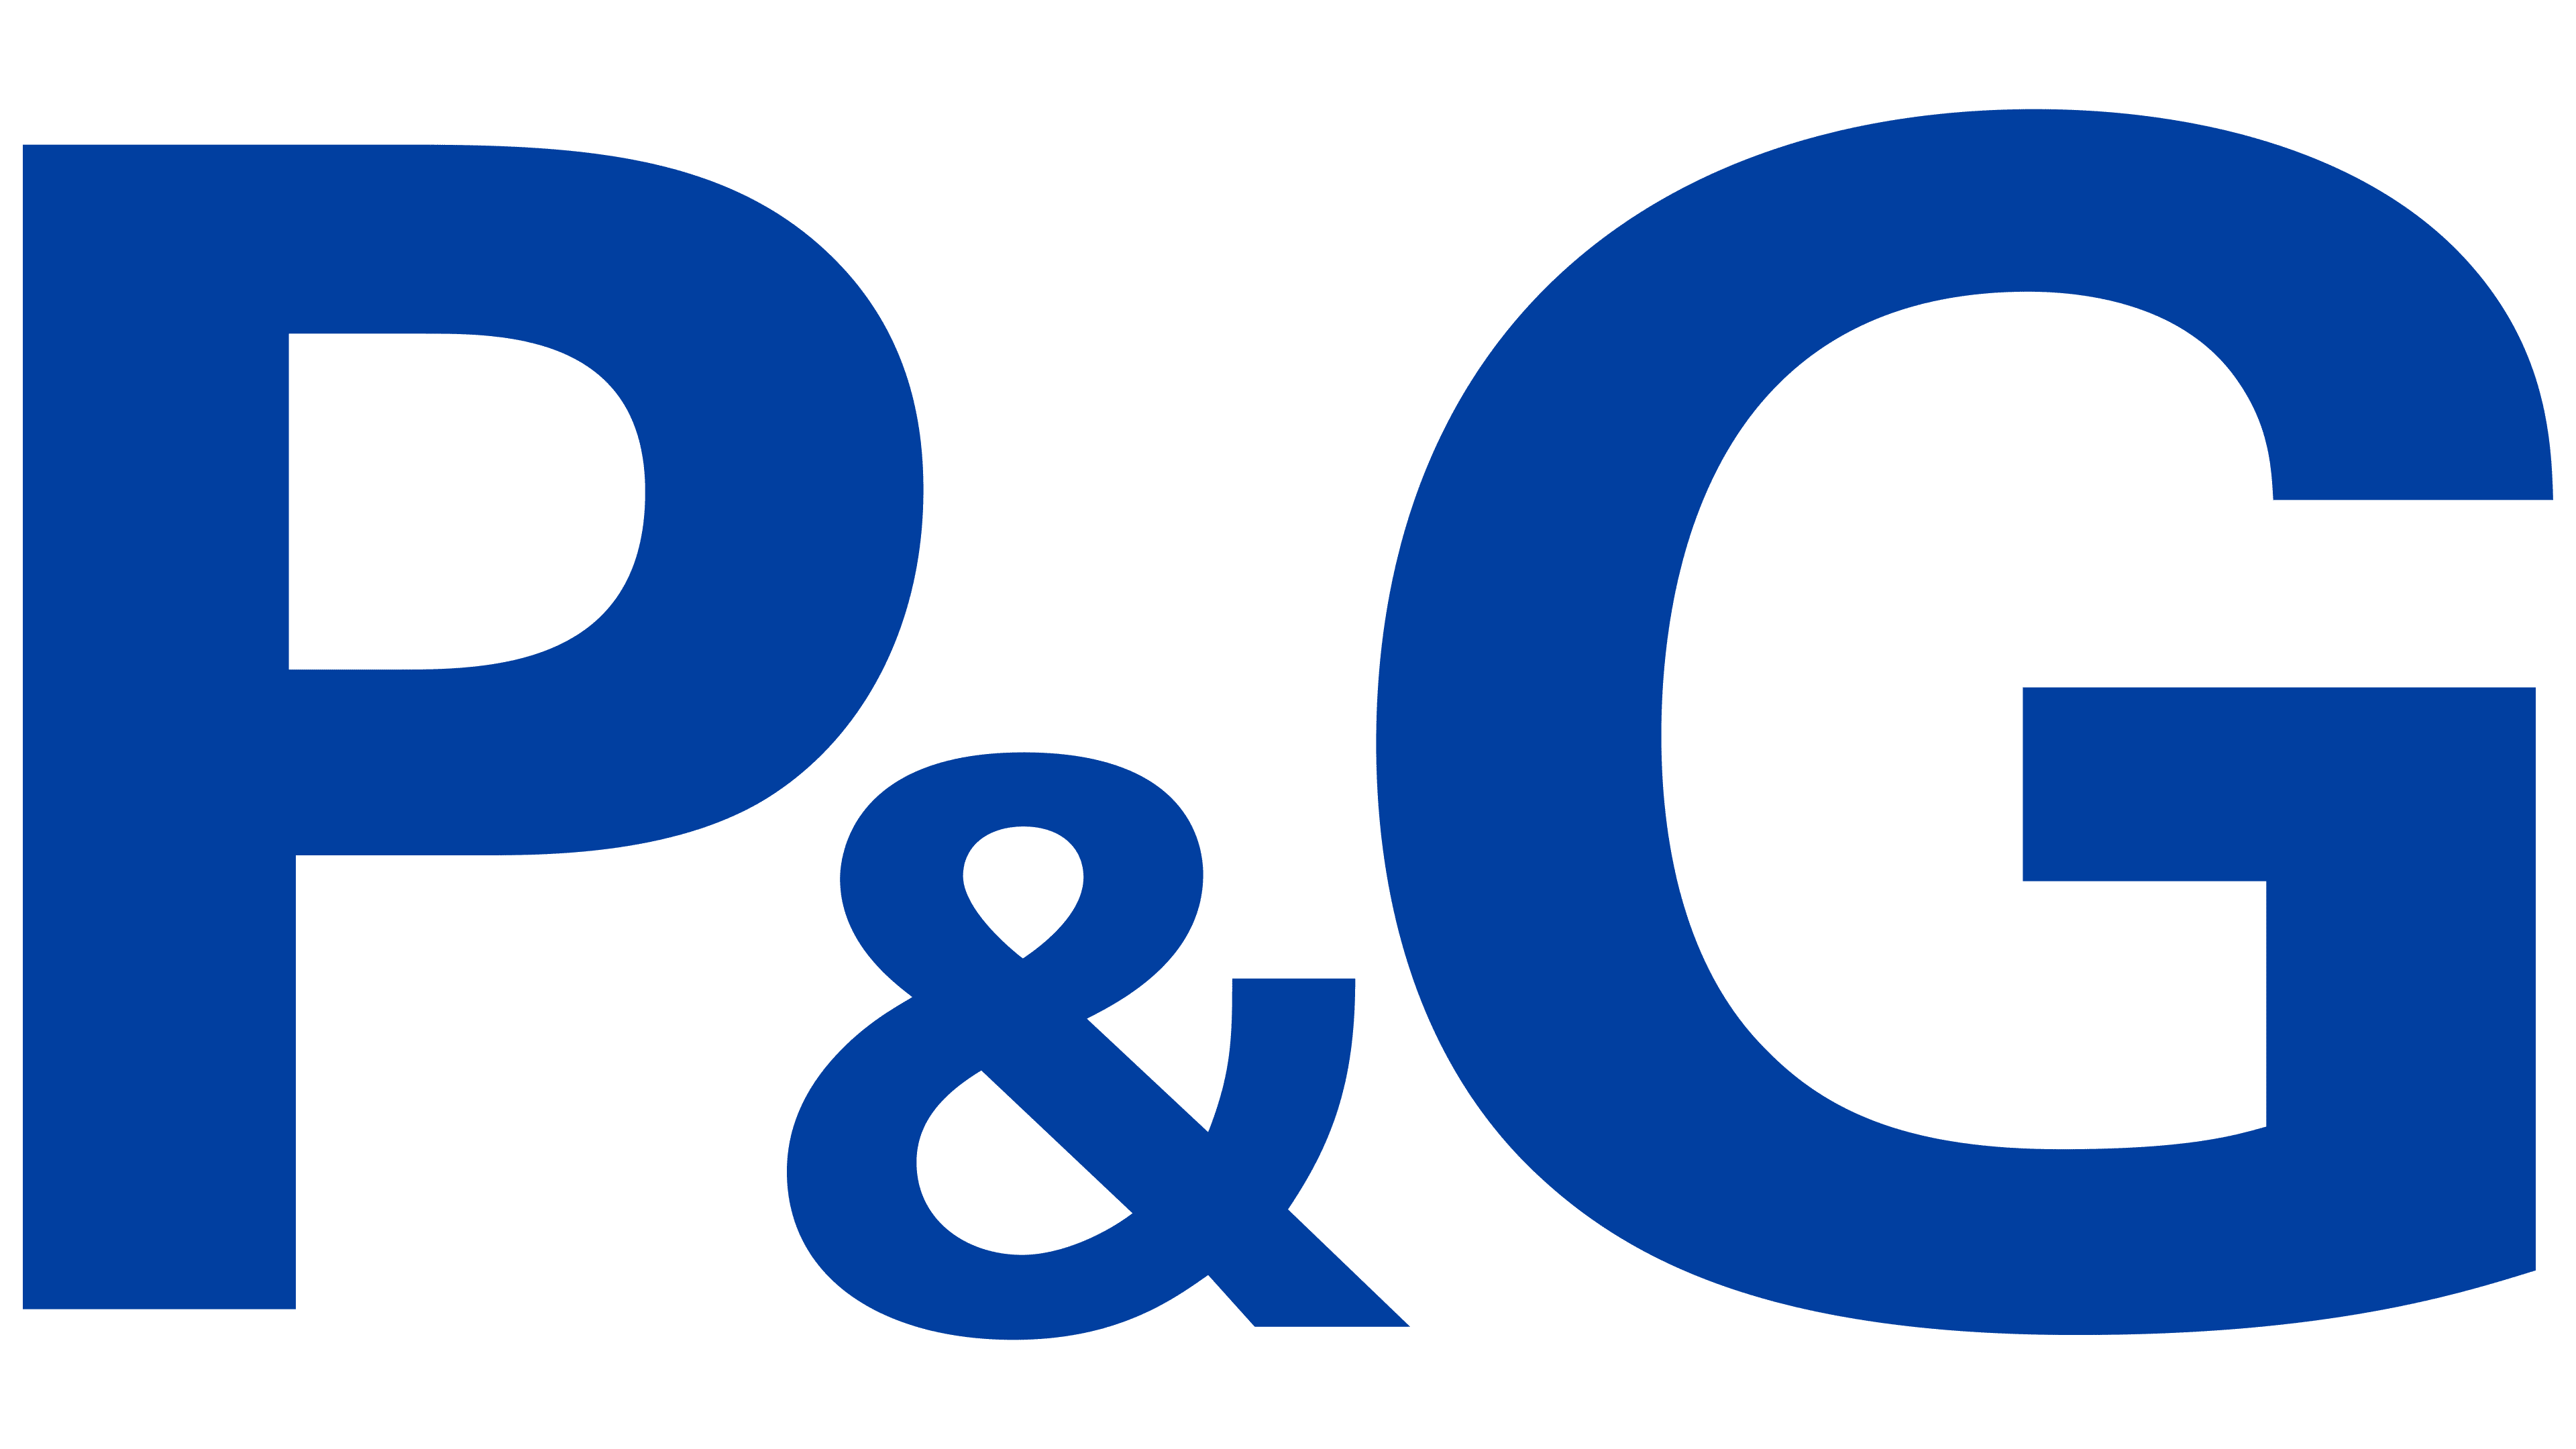 Poki Logo and symbol, meaning, history, PNG, brand